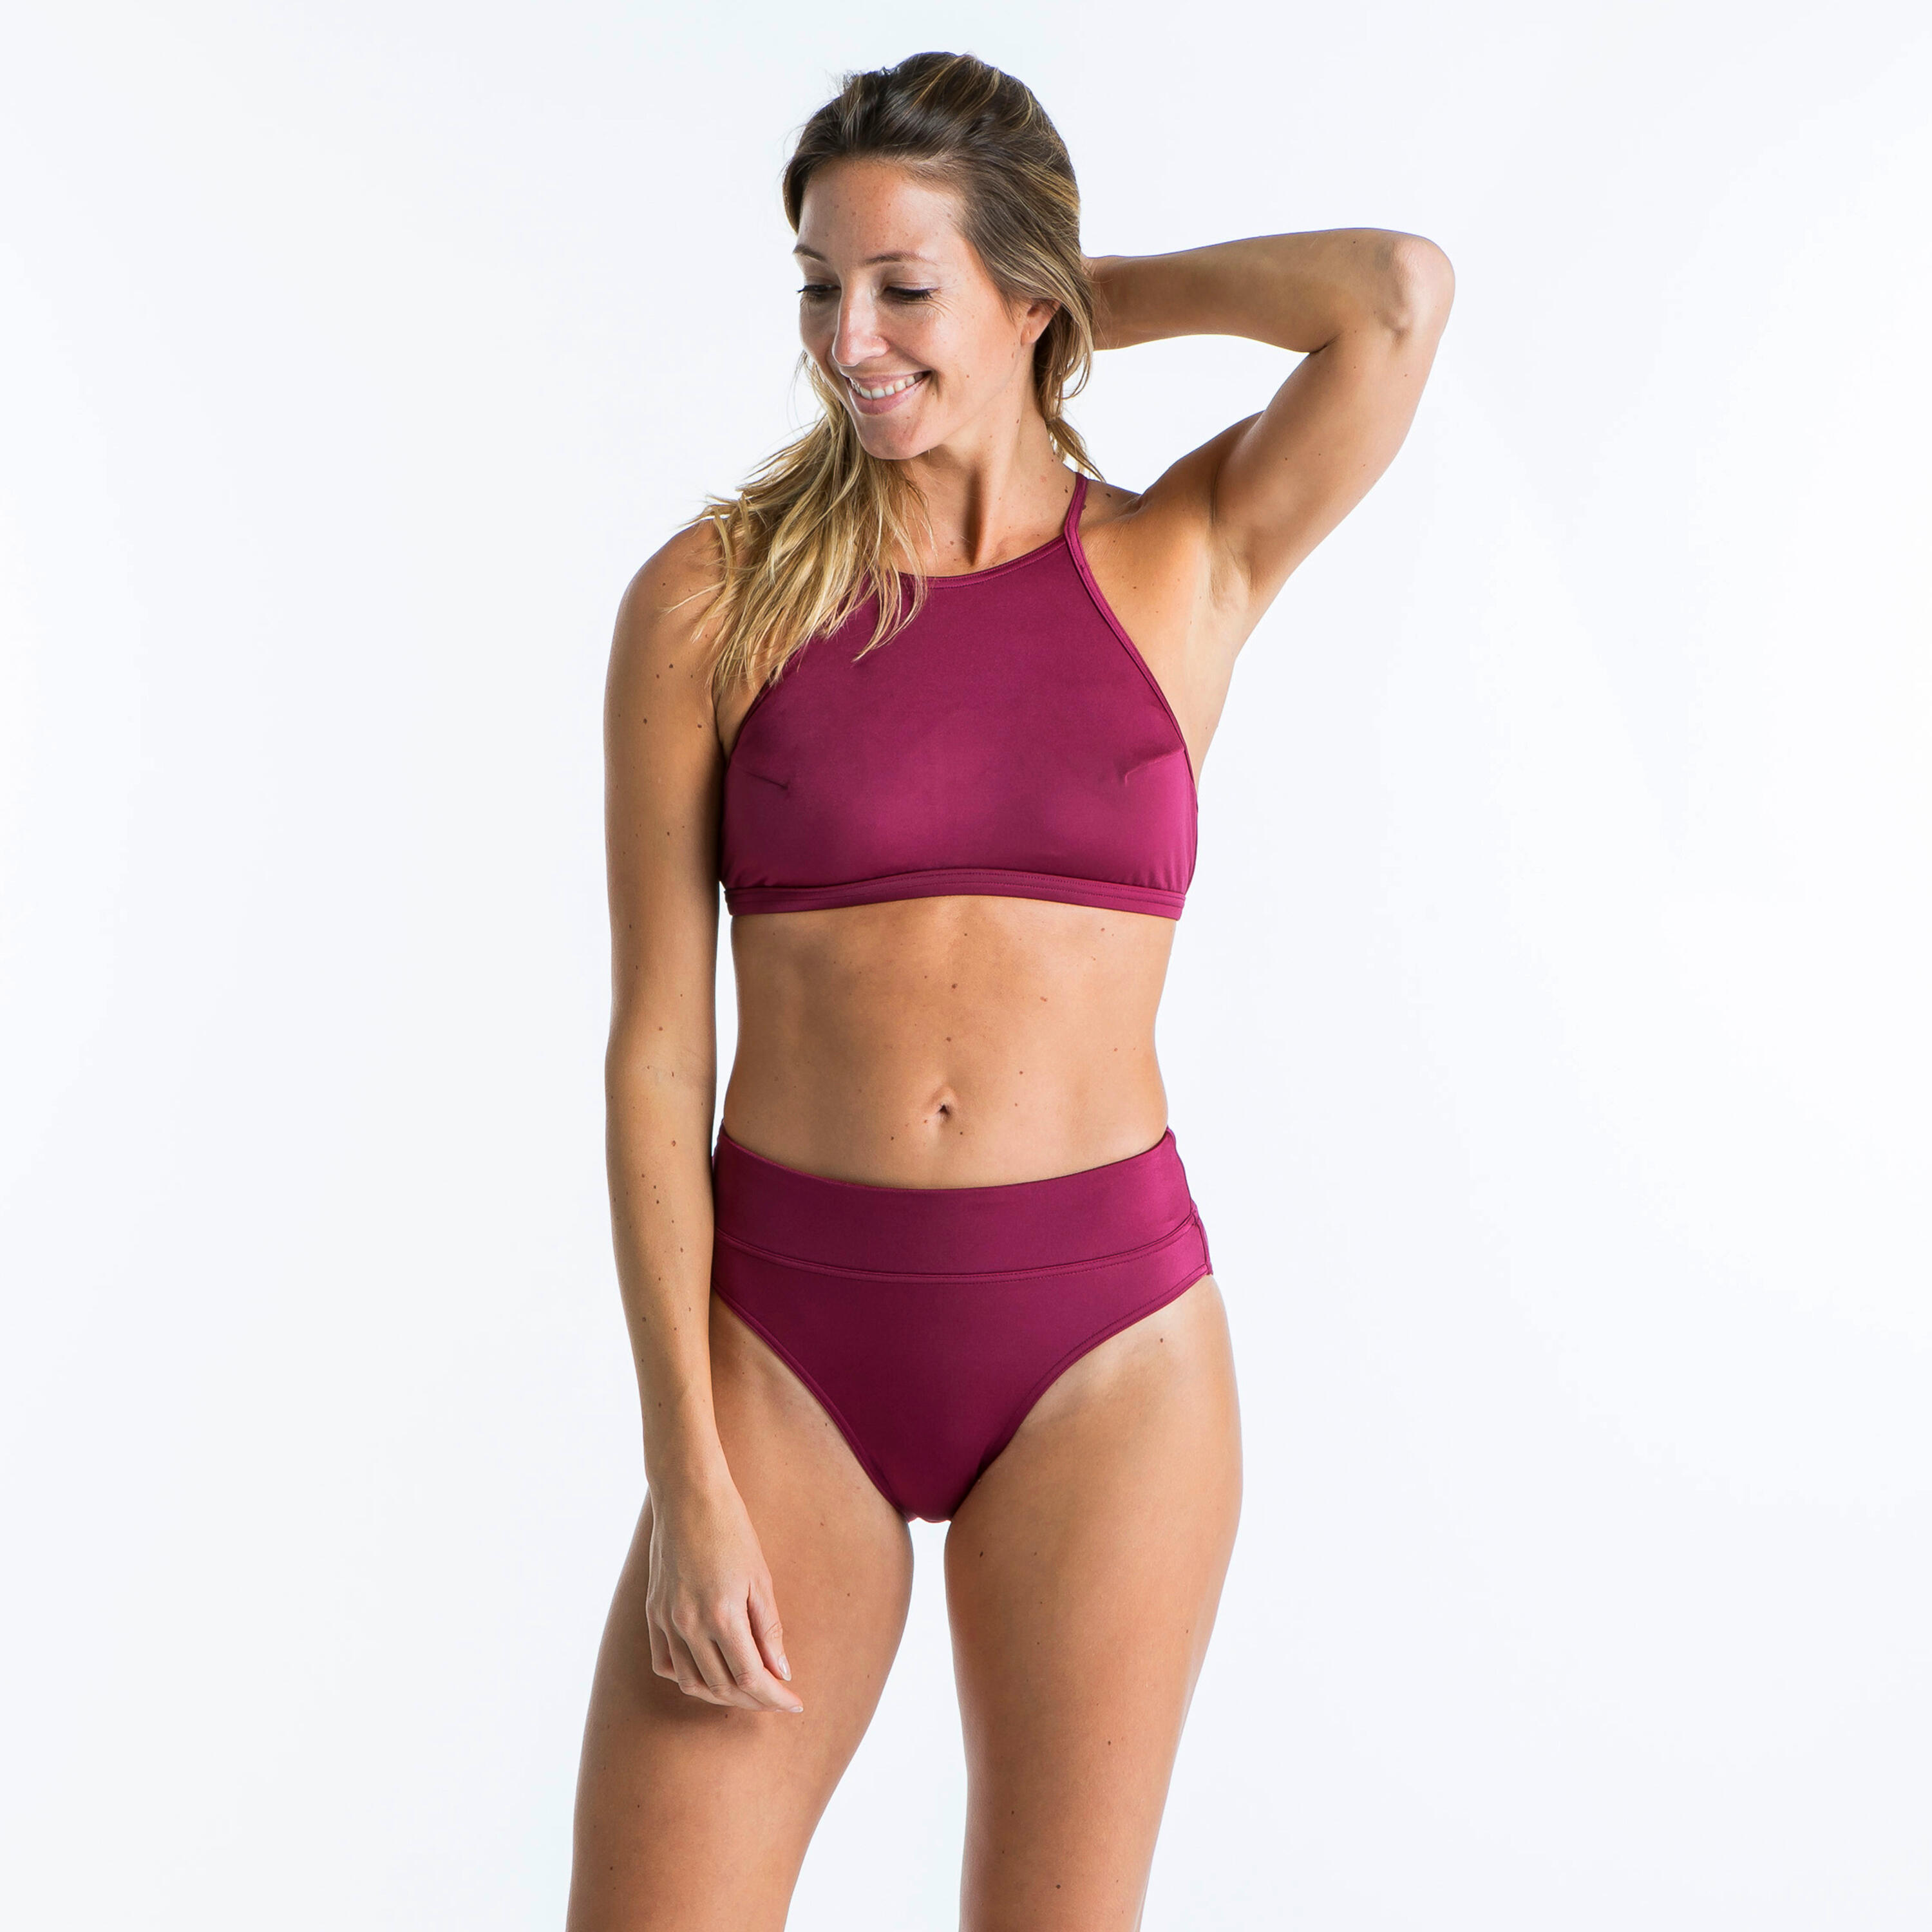 OLAIAN WOMEN'S SURFING HIGH-WAISTED BODY-SHAPING SWIMSUIT BOTTOMS NORA - BURGUNDY